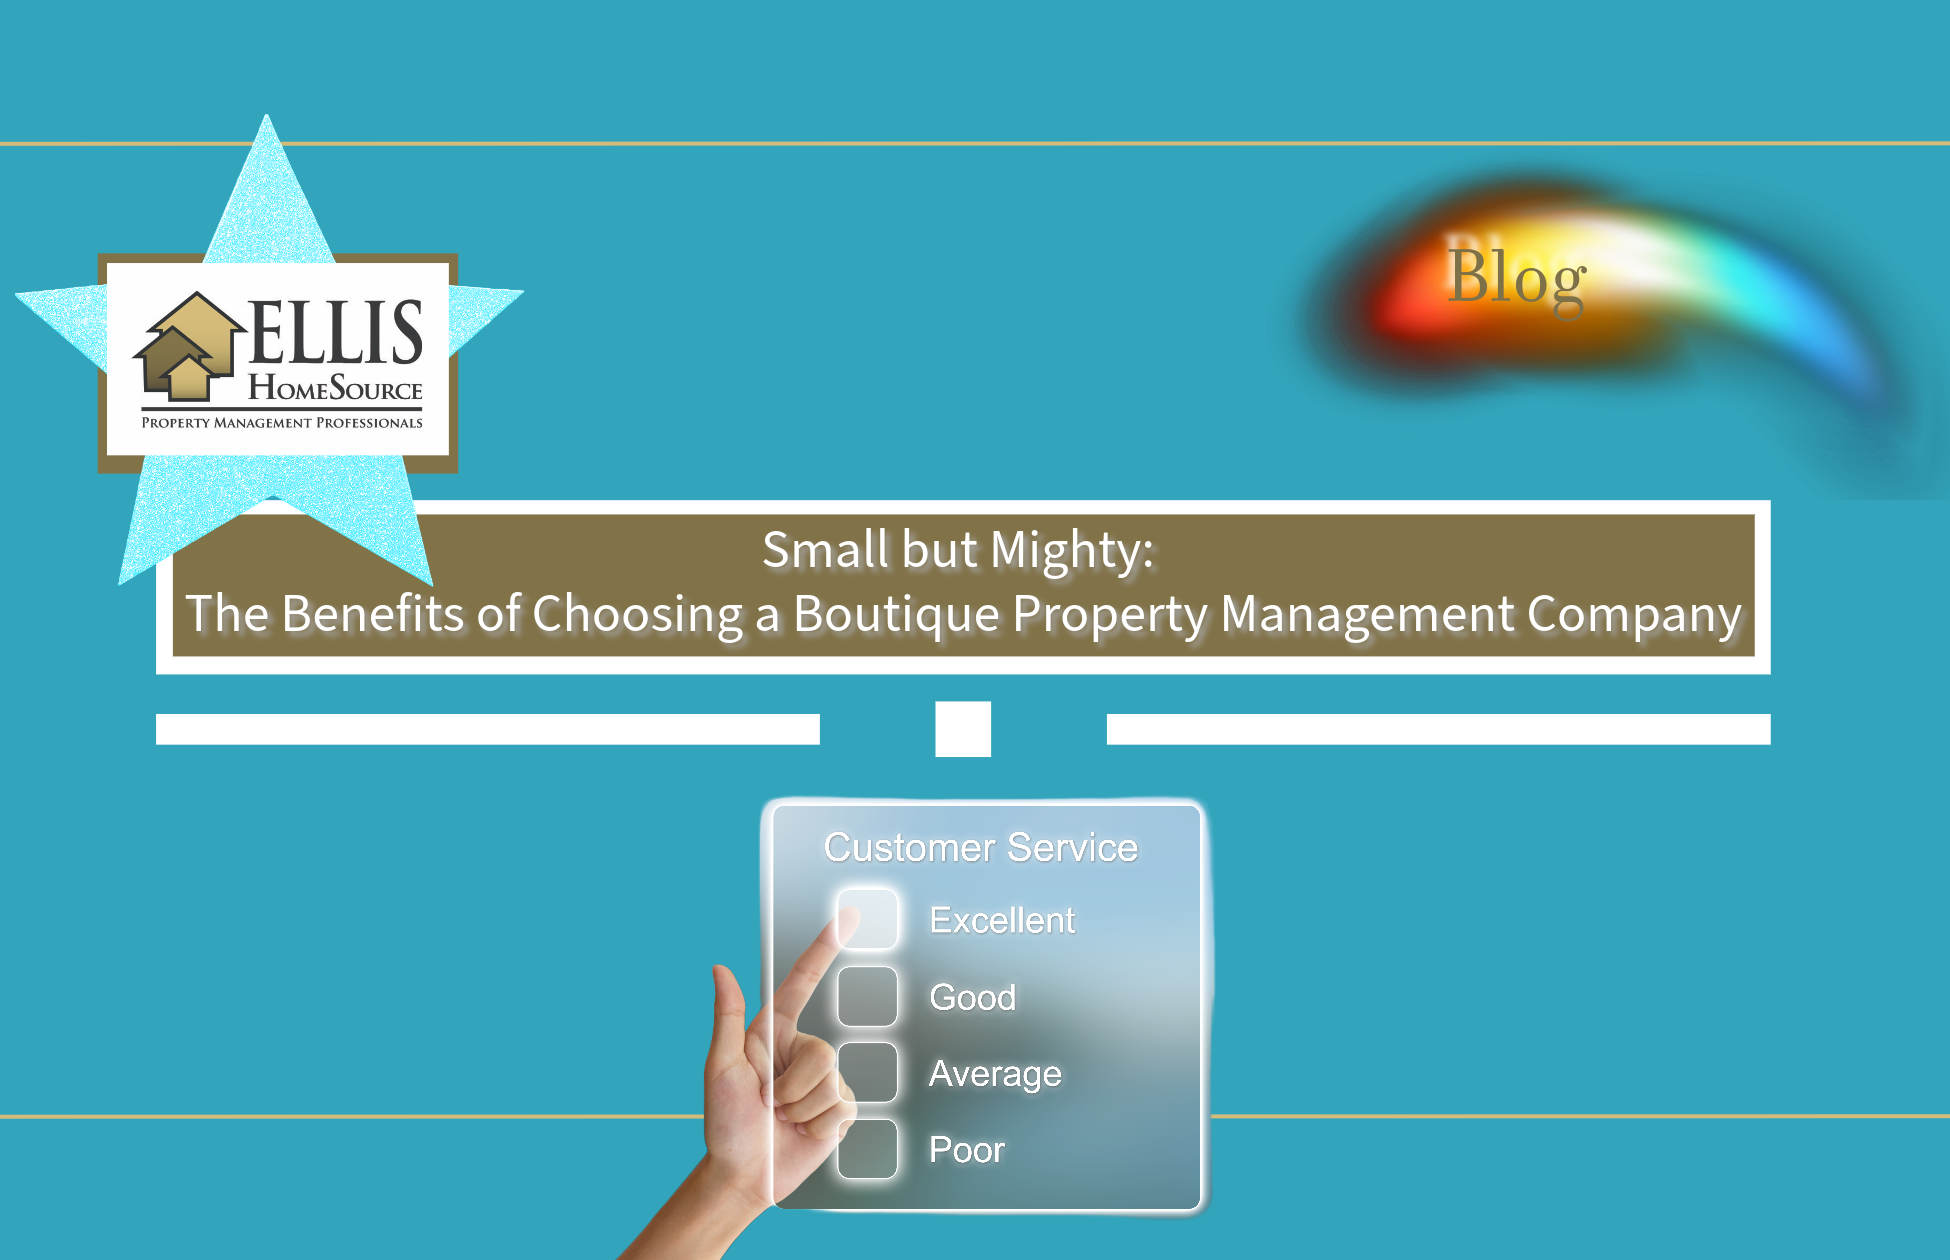 Small but Mighty: The Benefits of Choosing a Boutique Property Management Company